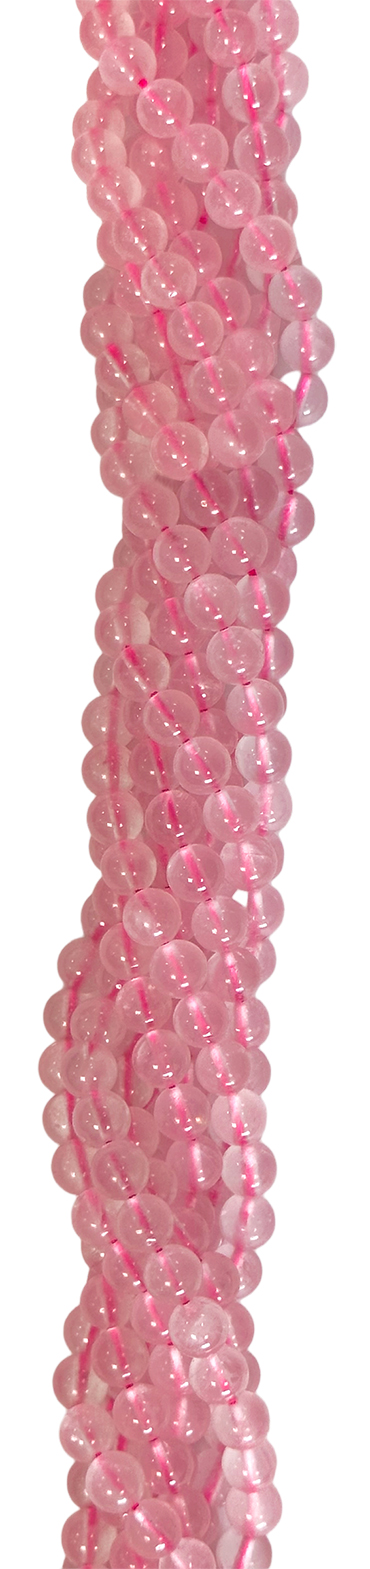 Rosequartz A 6mm pearls on string